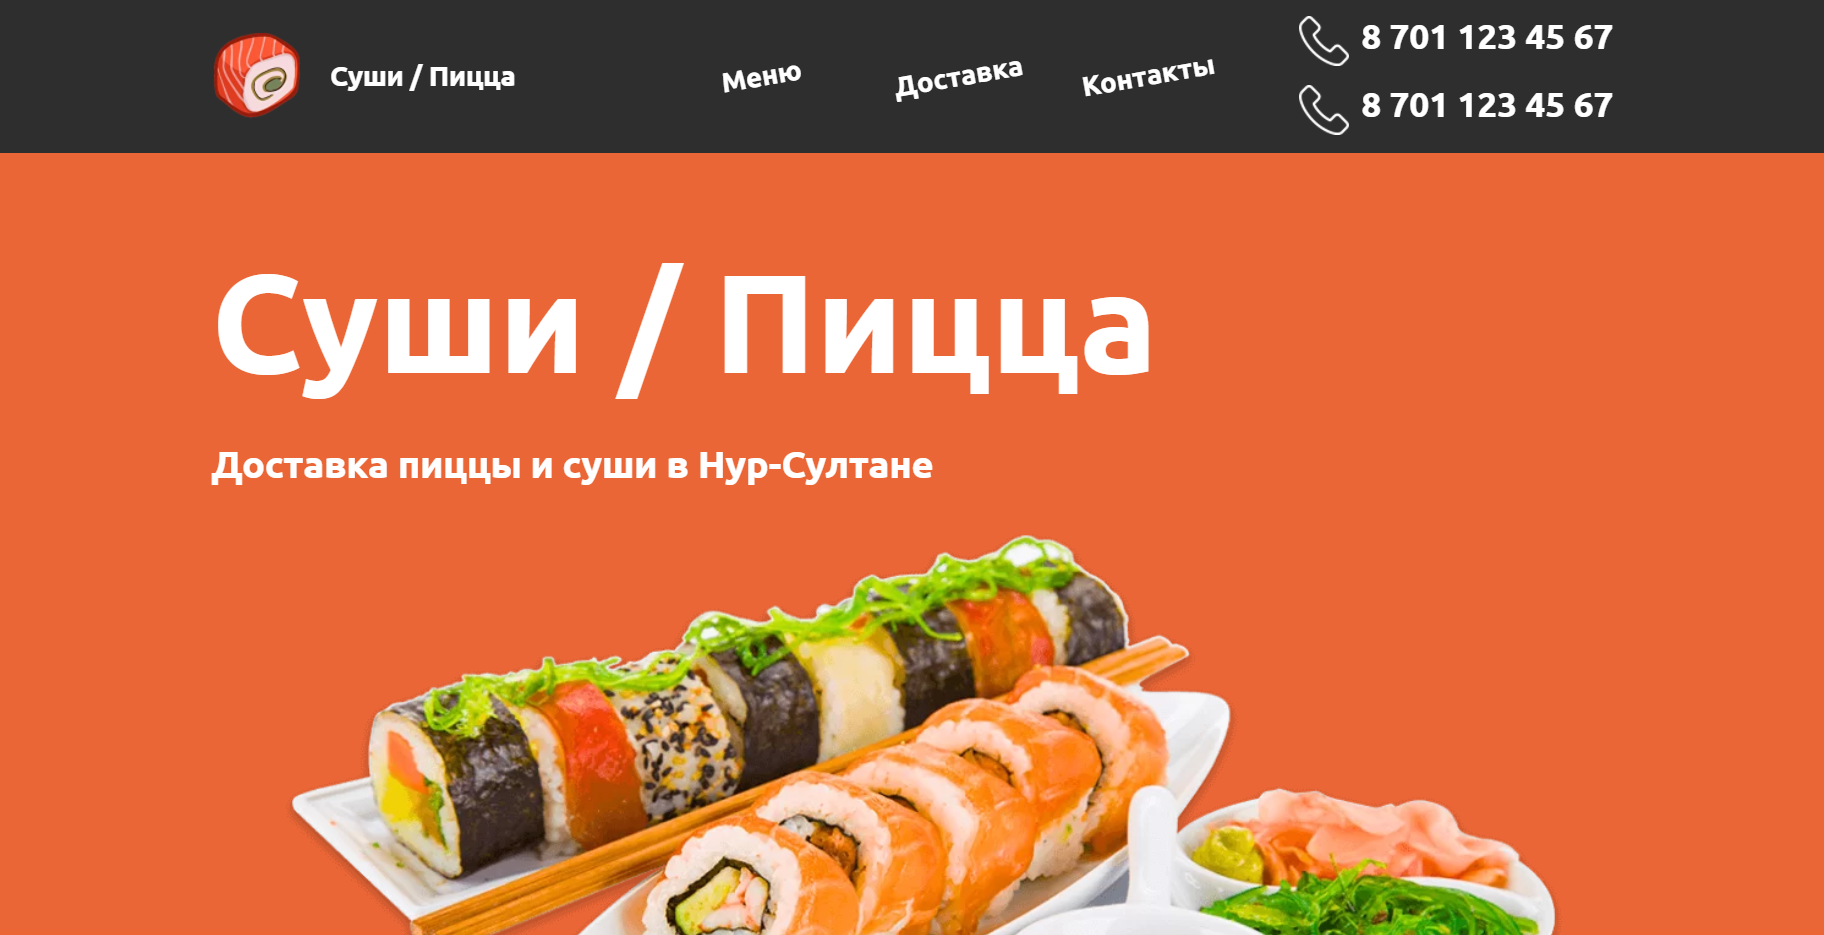 Site layout - Order Sushi / Rolls and Pizza